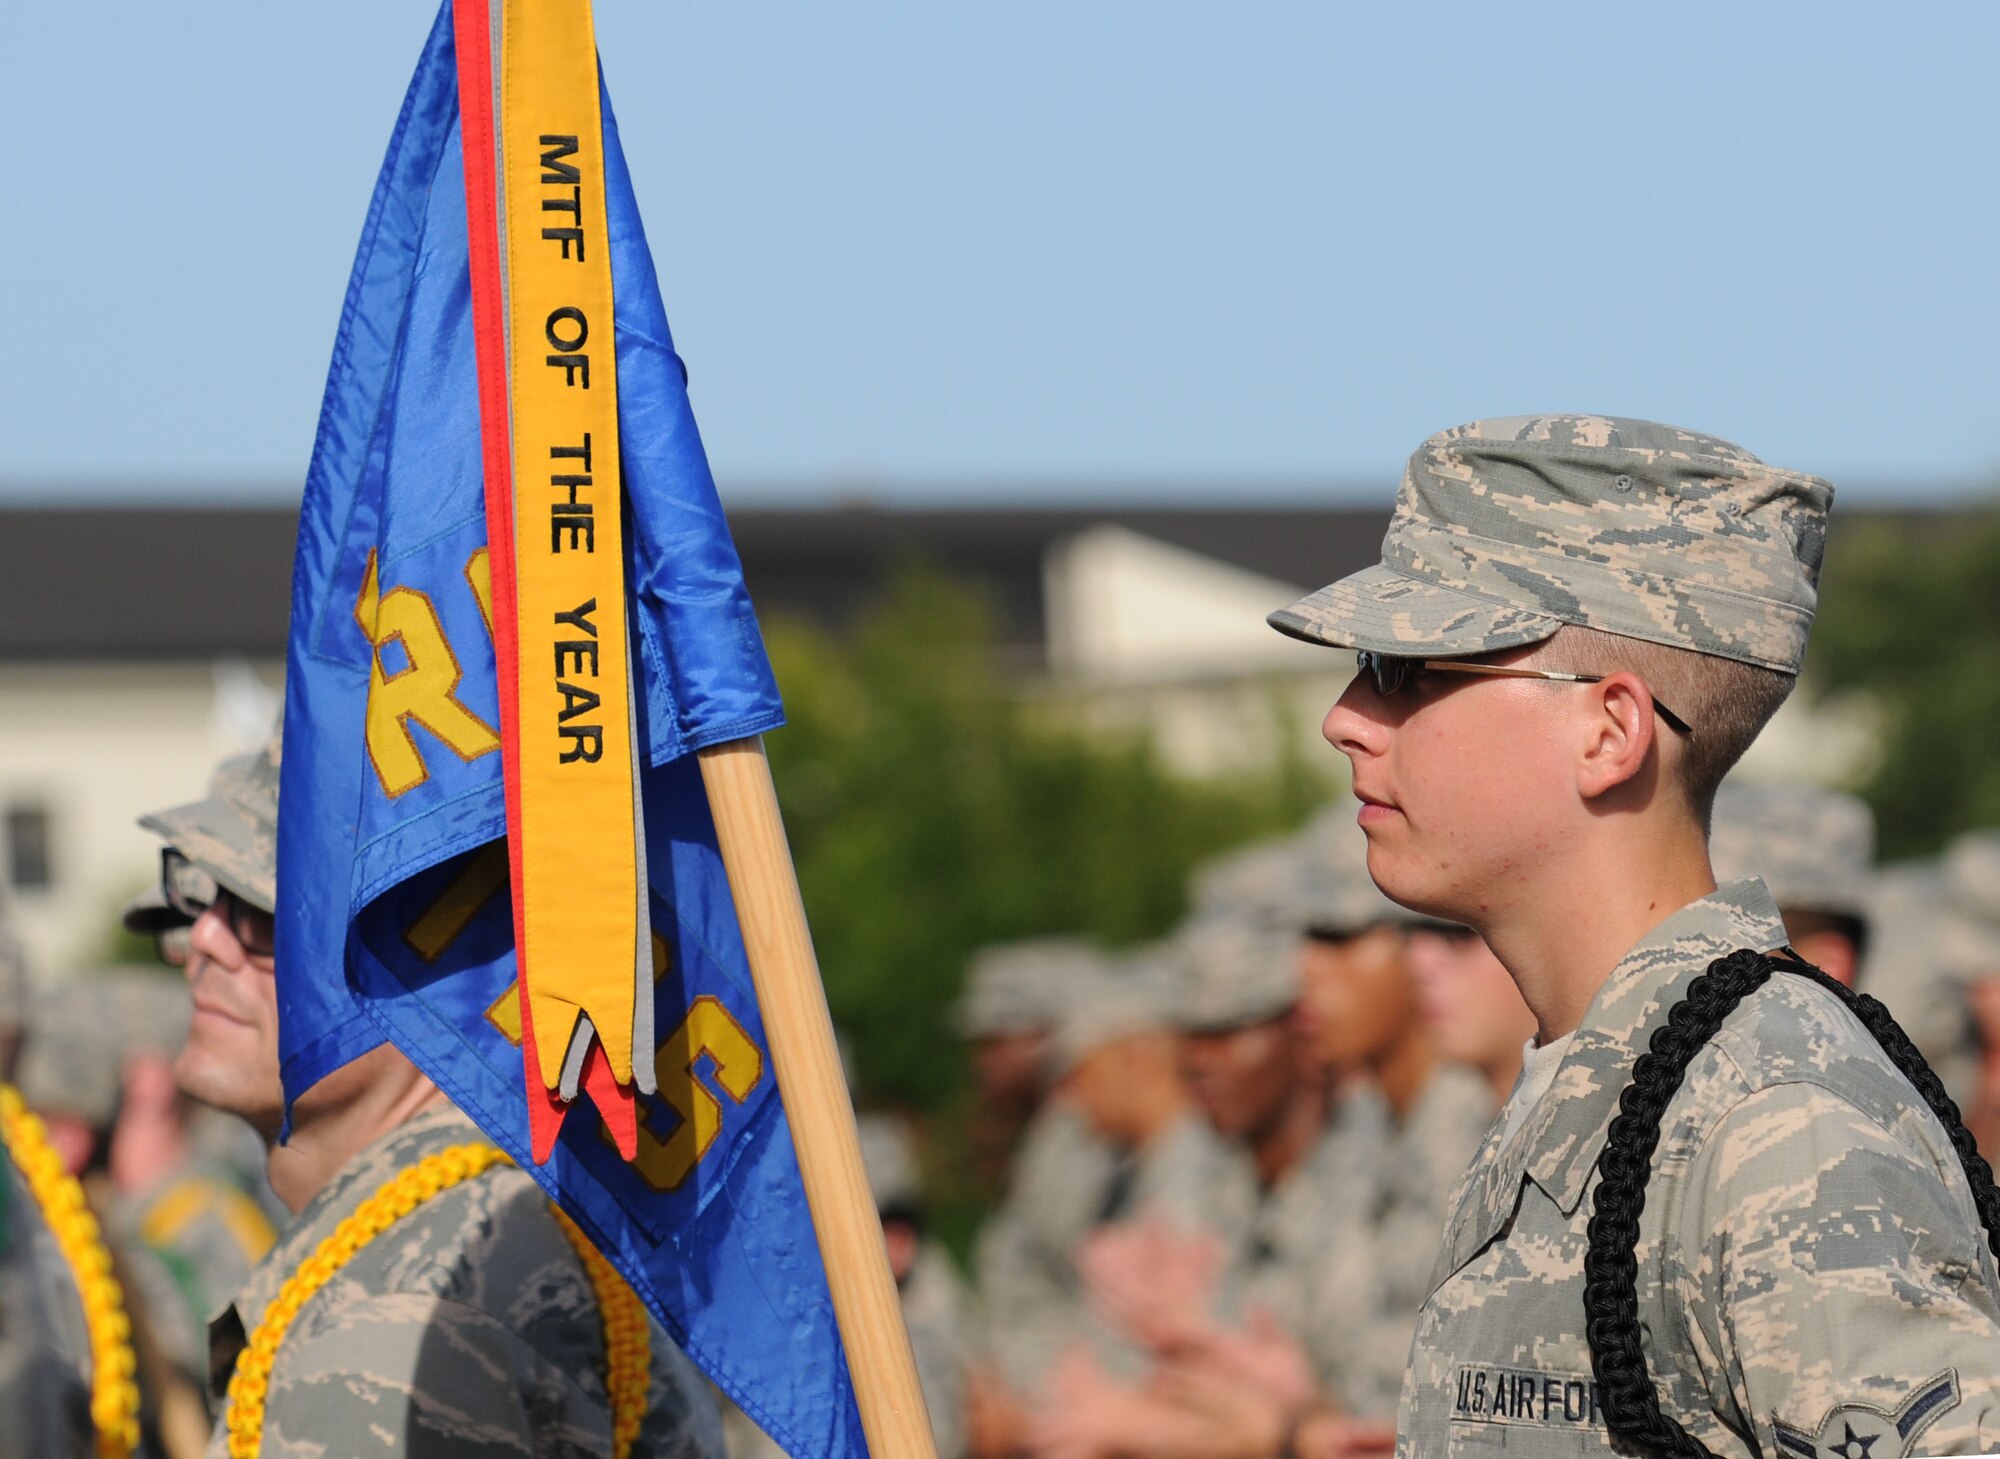 Airman Chase Lovelace, 335th Training Squadron, holds his squadron’s guidon while standing in formation during the 81st Training Group Dragon Recognition Ceremony on the drill pad at the Levitow Training Support Facility July 28, 2016, on Keesler Air Force Base, Miss. The 335th TRS was awarded the Military Training Flight of the Month. The monthly event also recognized the Airman of the Month, the 2016 second quarter Military Training Flight and Military Training Leader Dragon Award winners as well as Airmen promotees. (U.S. Air Force photo by Kemberly Groue/Released)